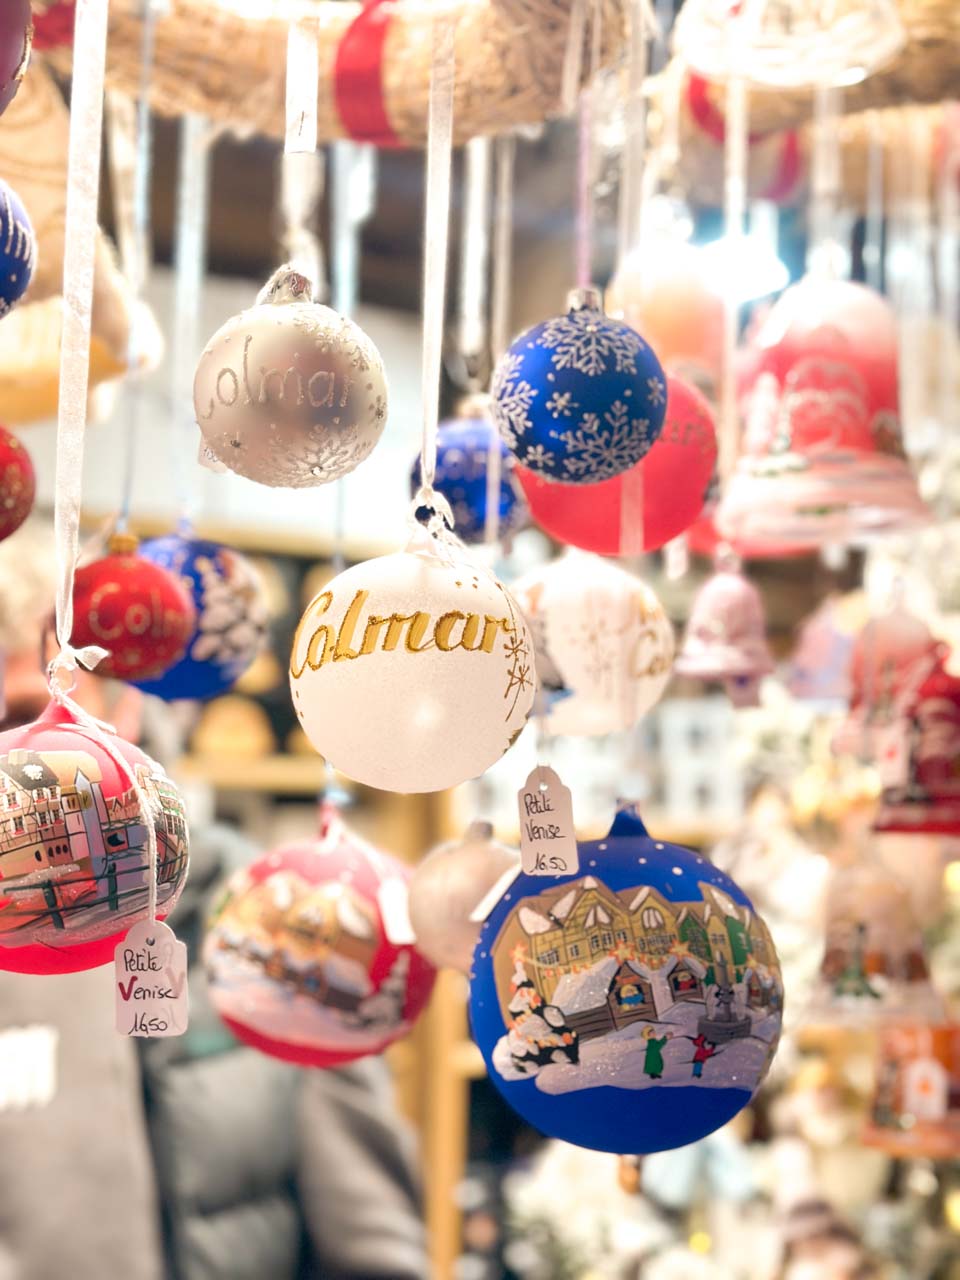 An array of hand-painted Christmas ornaments hanging on display at a market stall, with 'Colmar' and other festive designs